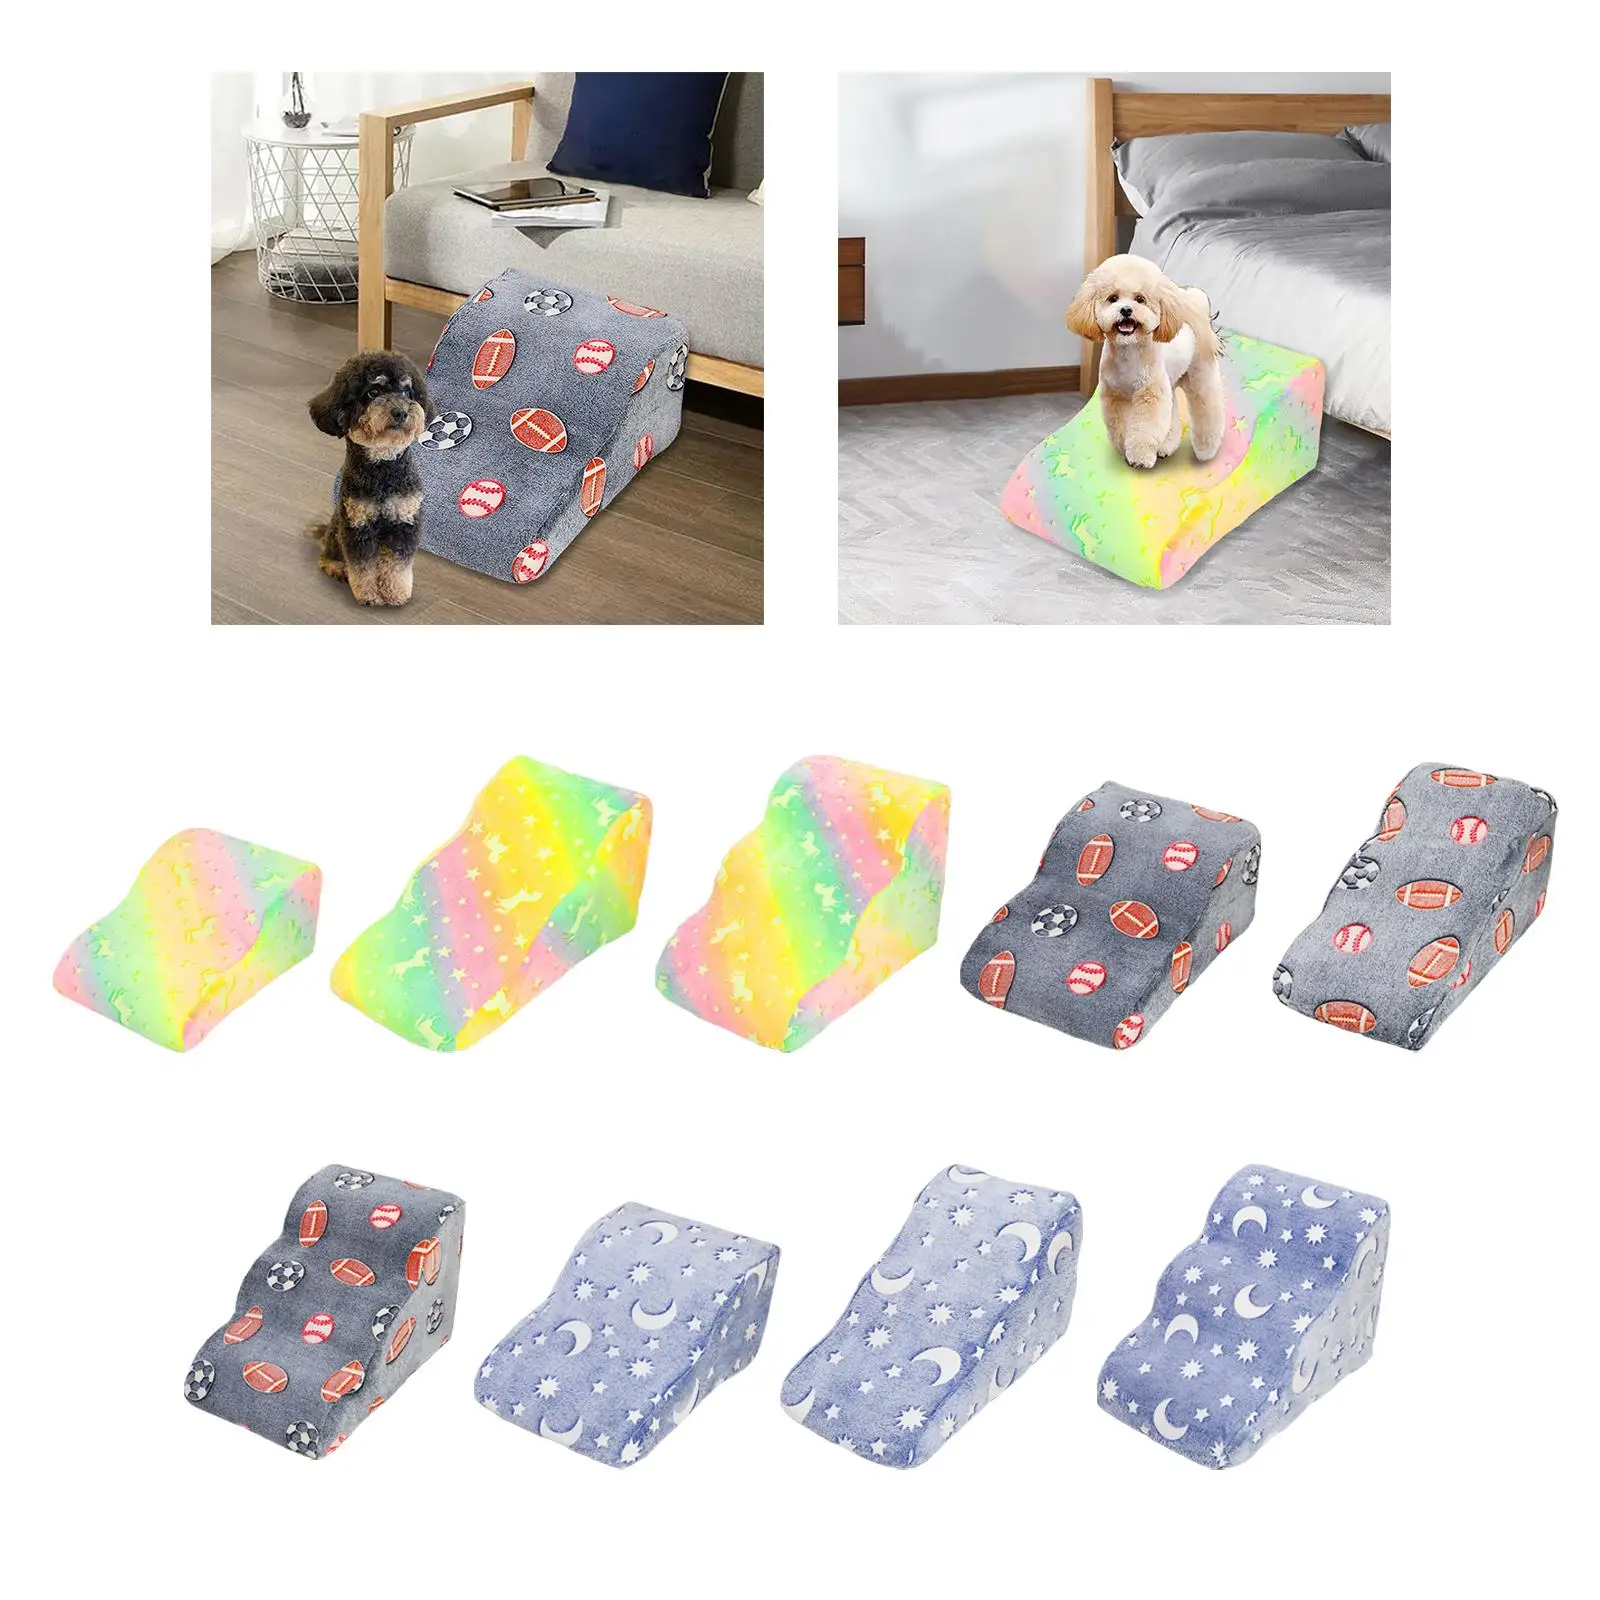 Dog Ramp Dog Steps Pet Stairs with Noctilucent Zippered Cover Couch Pet Toy Pet Stairs Detachable Anti Slip Bottom reflective